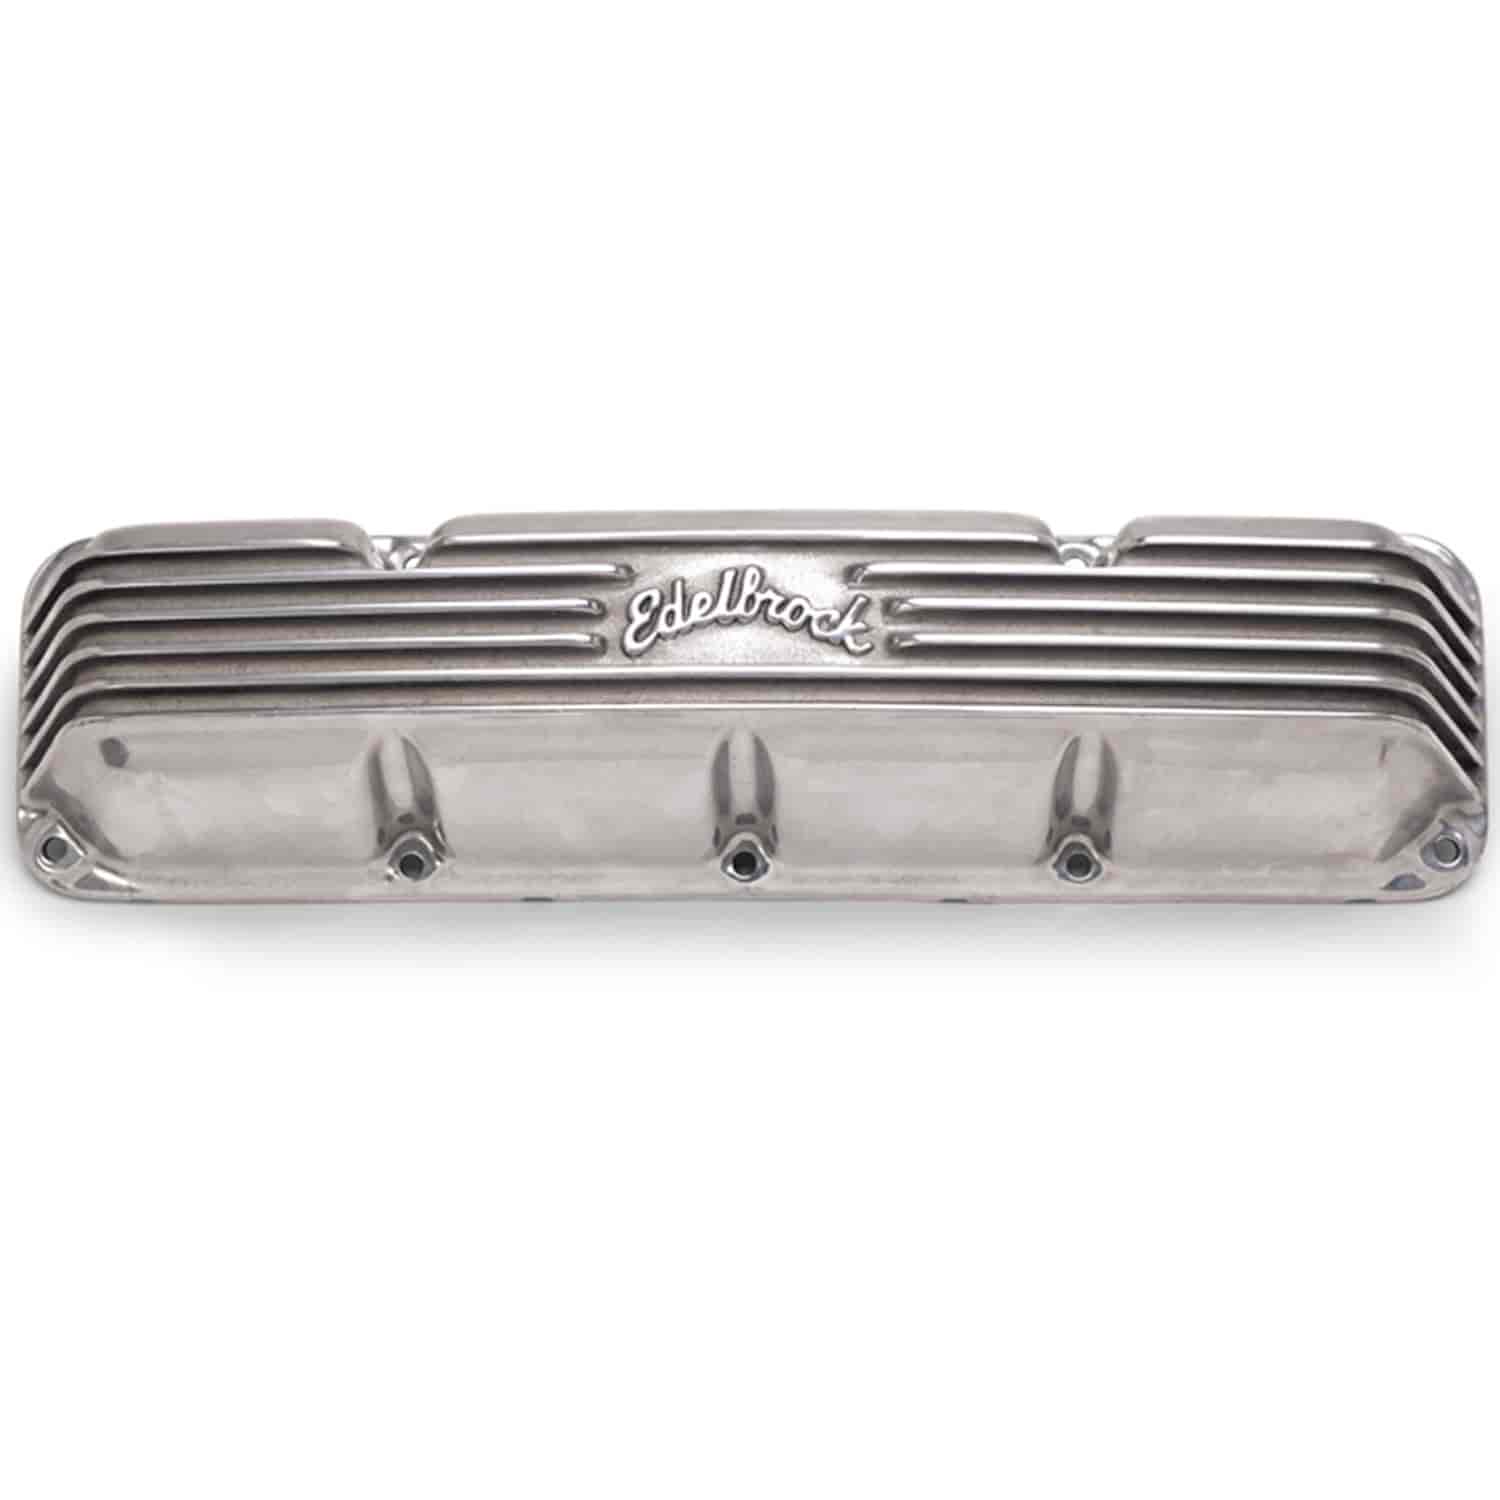 Classic Finned Valve Covers for 1967-1991 AMC/Jeep 290-401 V8 with Polished Finish